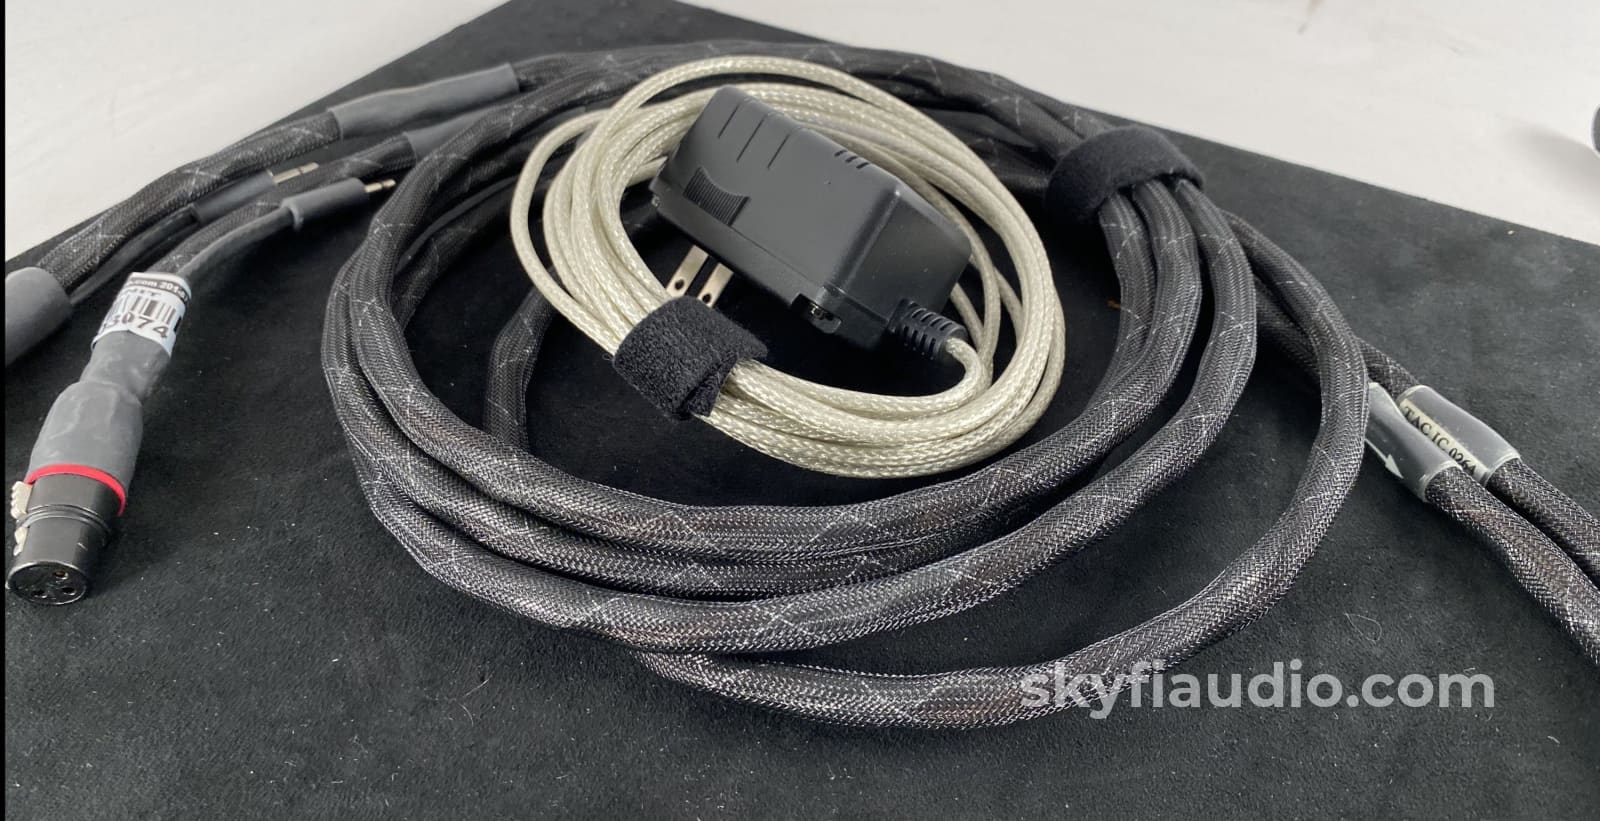 Synergistic Research - Tesla Accelerator Xlr With Active Power 2M Cables